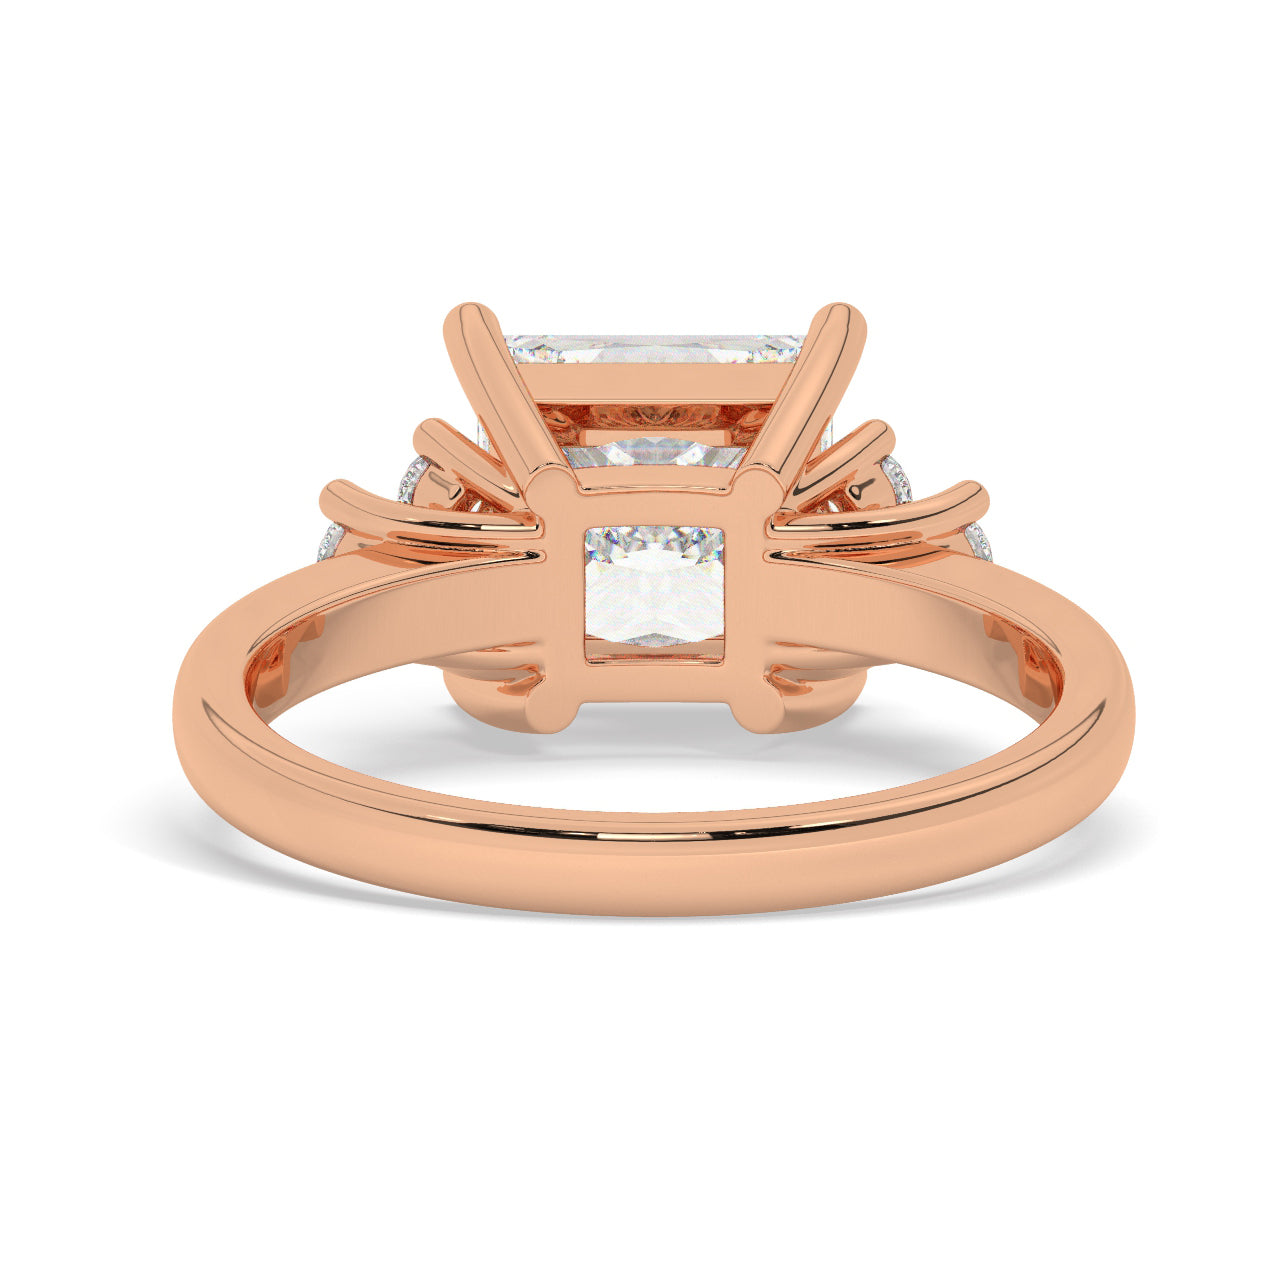 Rose Gold Princess Cut Engagement Ring Accompanied by Round Stones - Back View